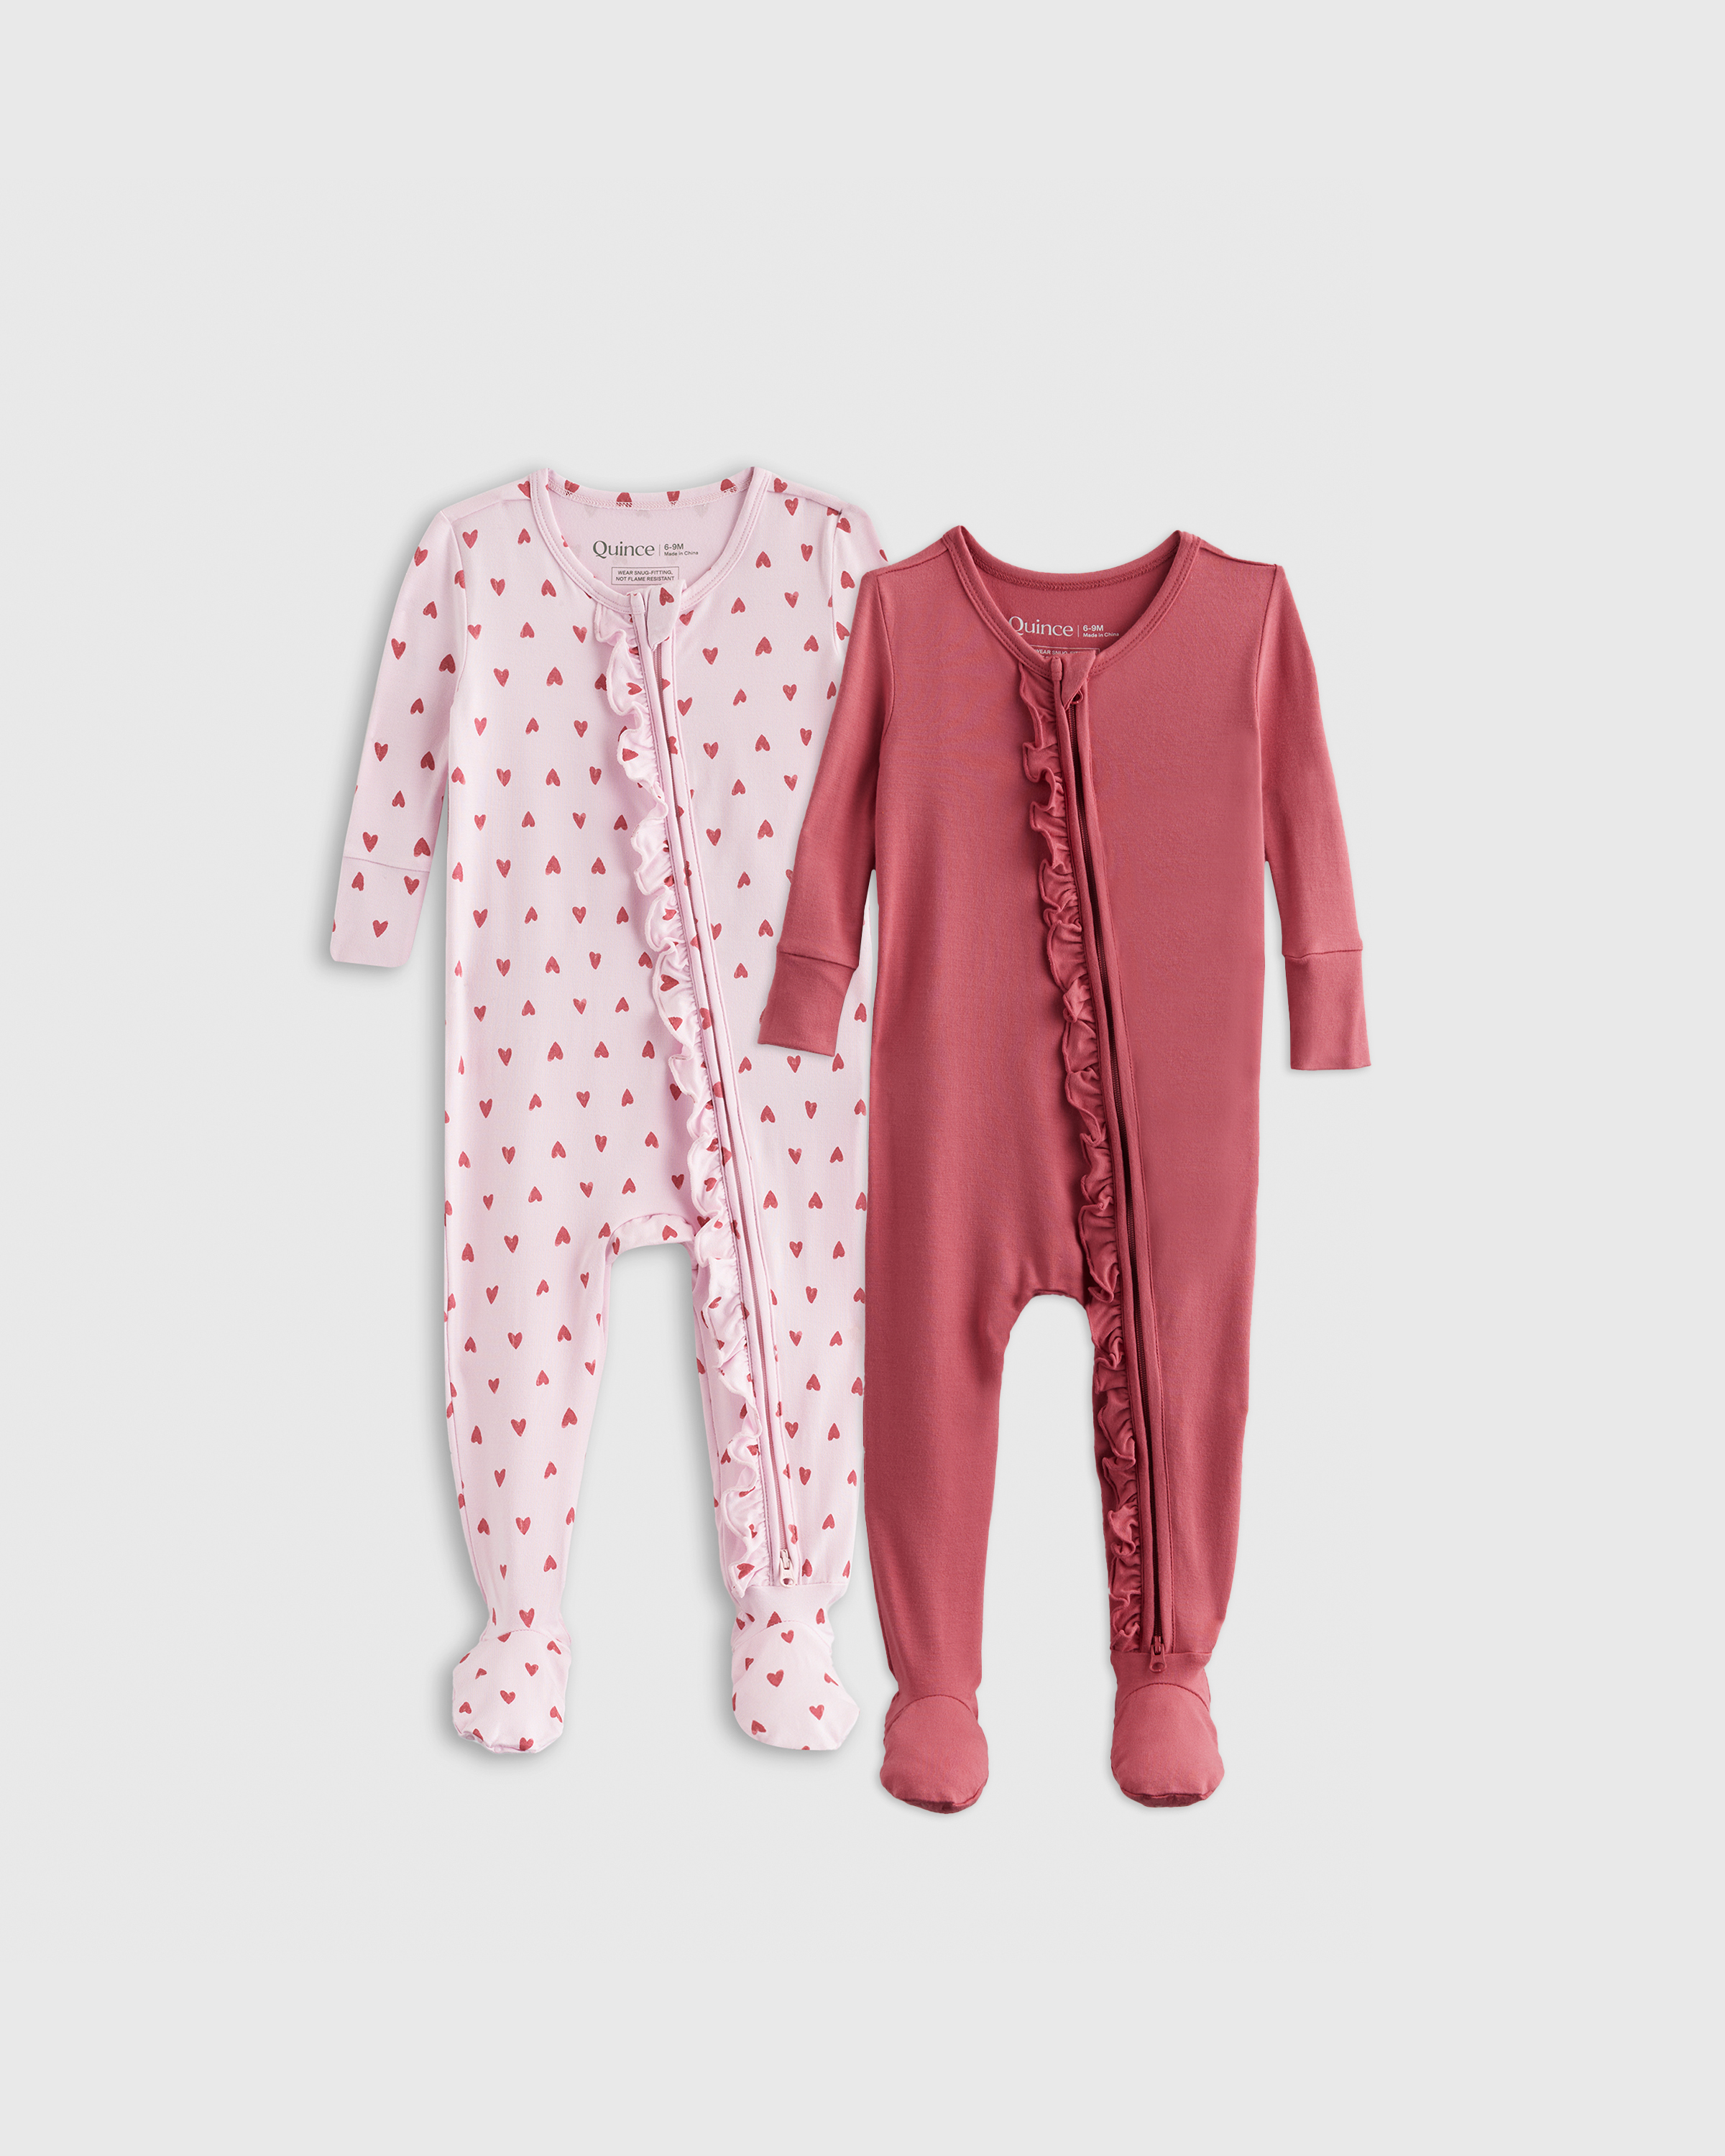 Quince Bamboo Ruffle Tight Fit Footie Pajamas 2-pack In Red